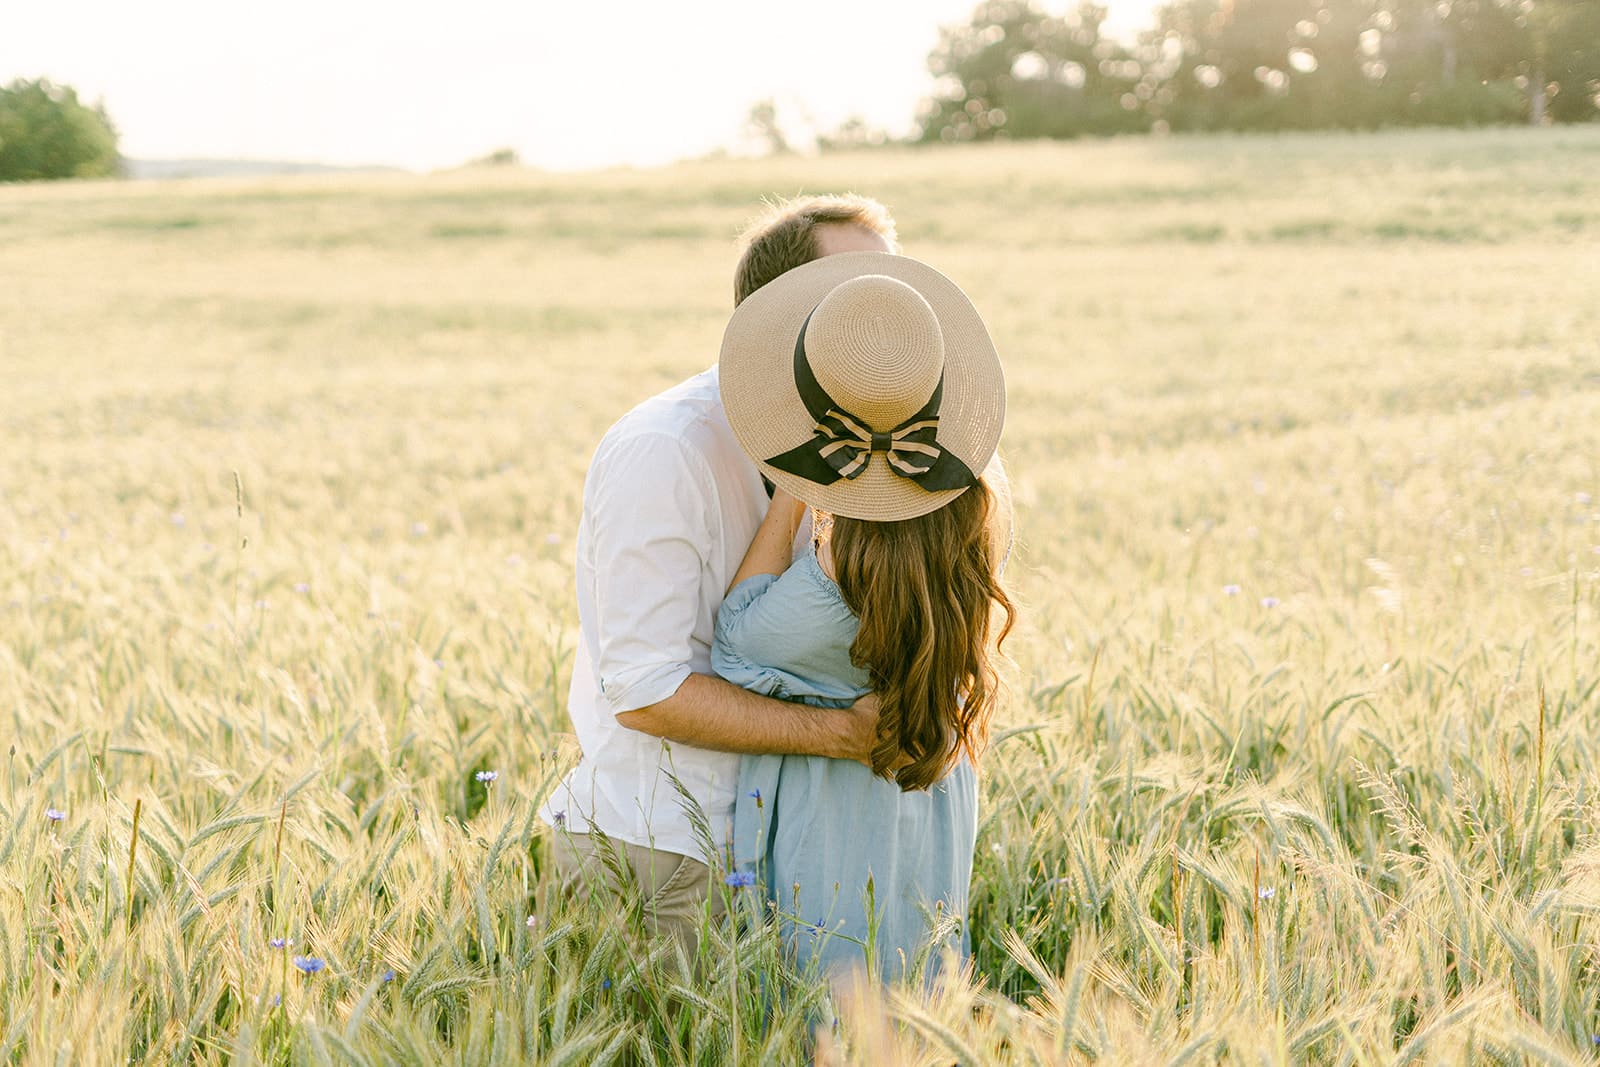 Couple at engagement session photo embrace and hold hat in front of their faces